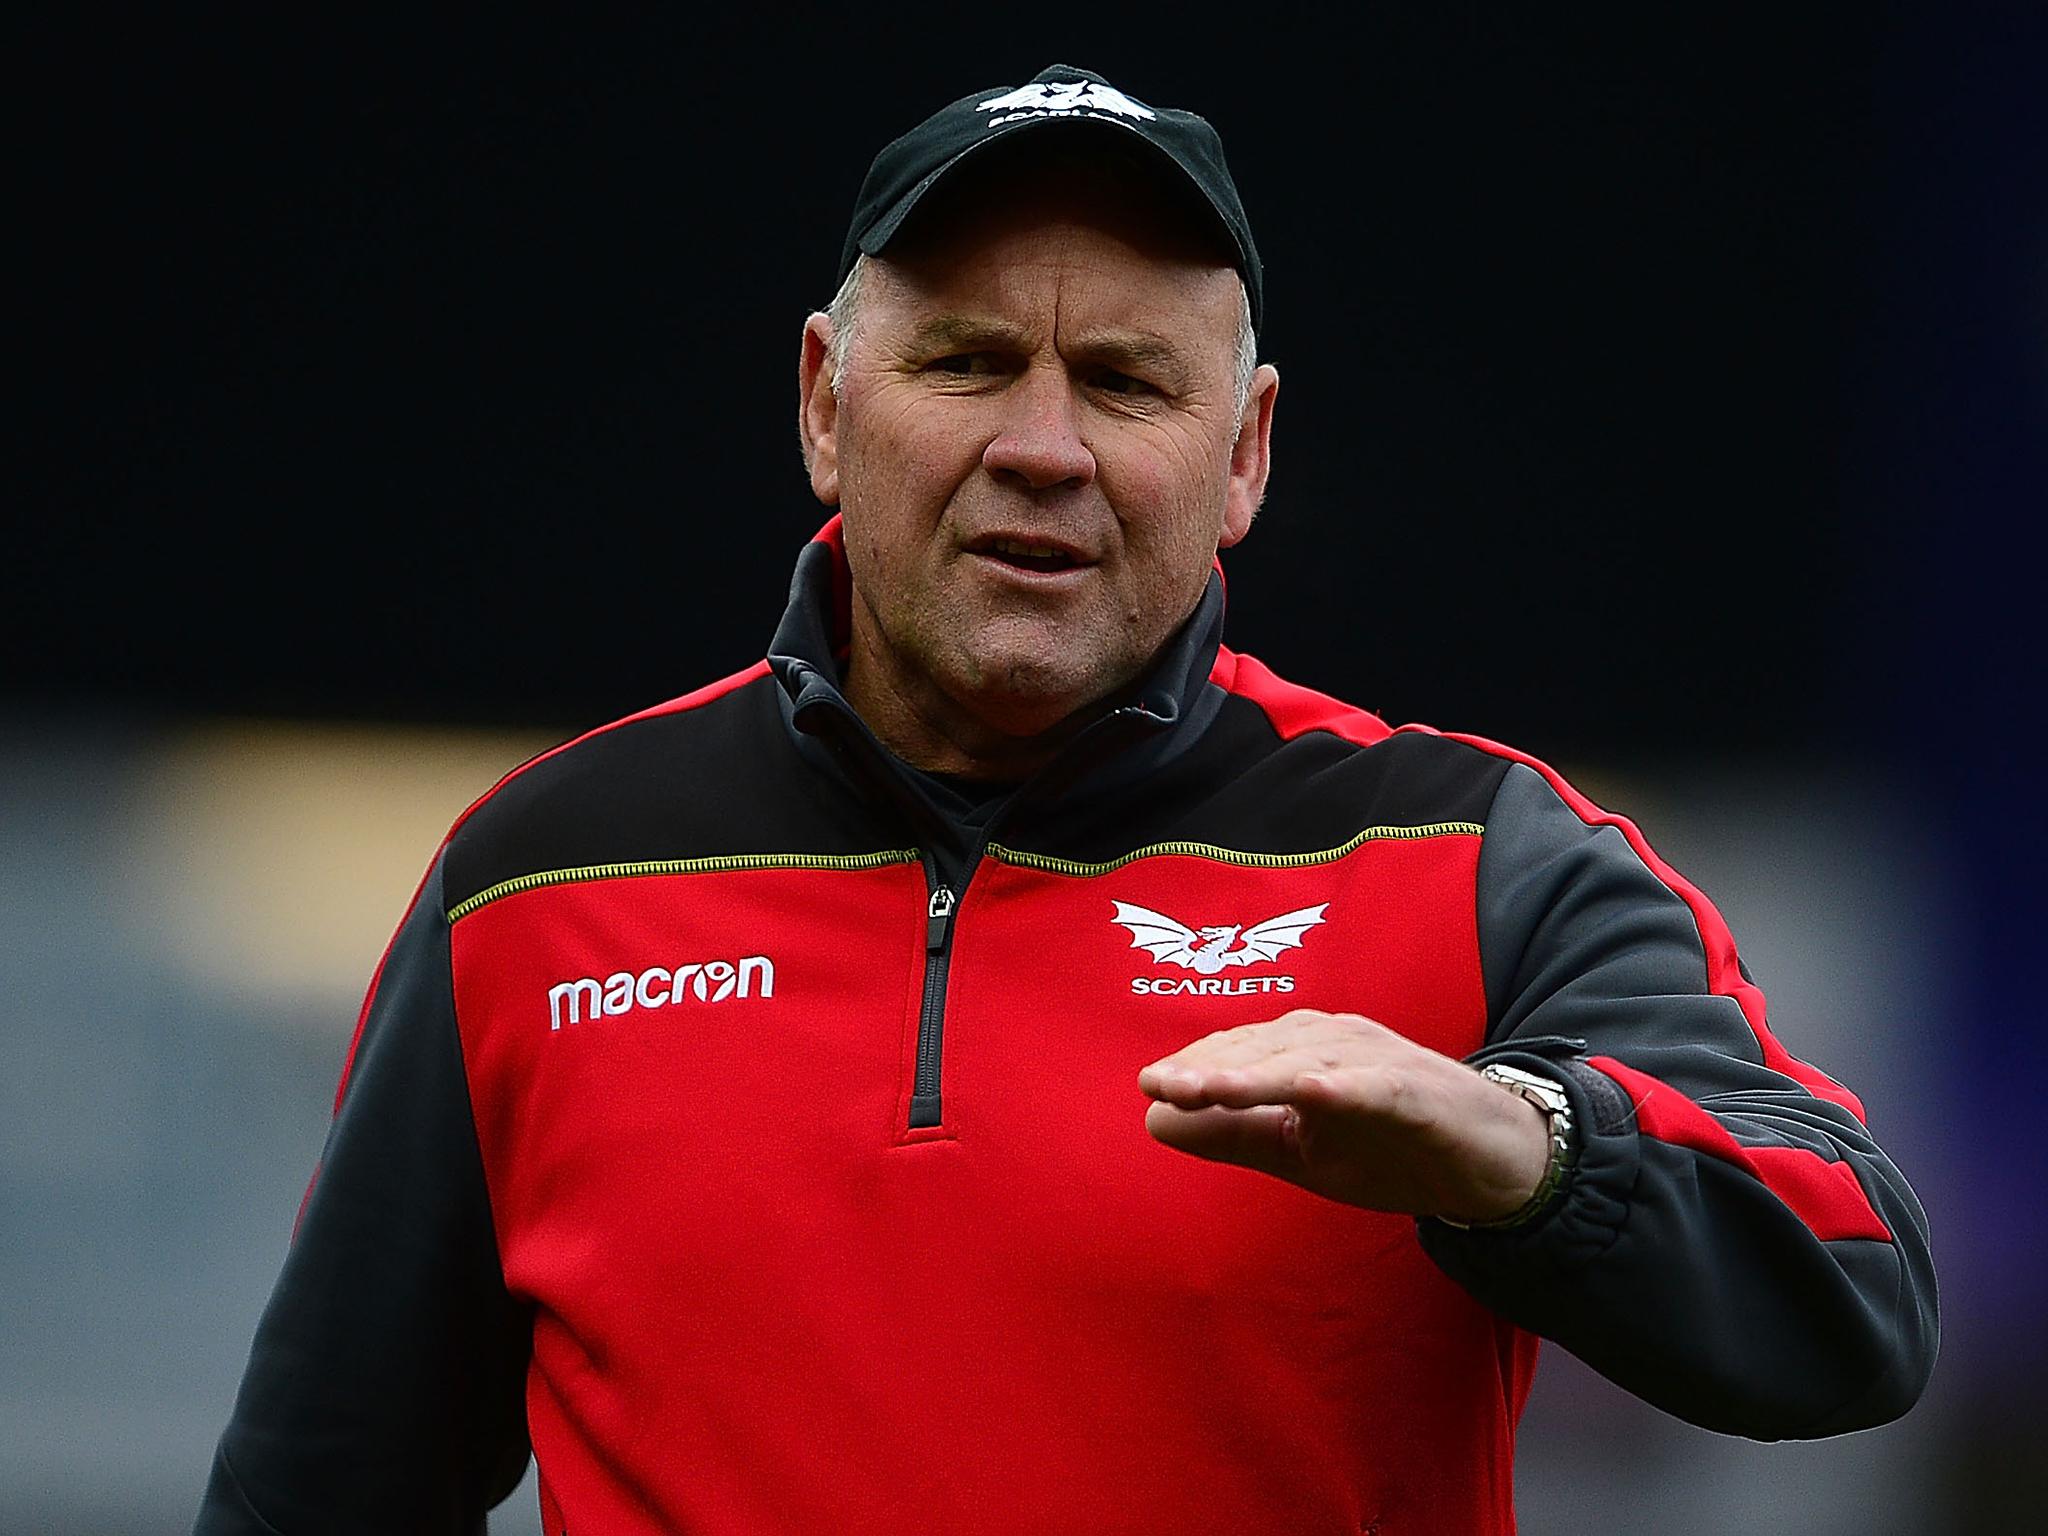 Wayne Pivac will take over from Warren Gatland as Wales head coach after the 2019 Rugby World Cup